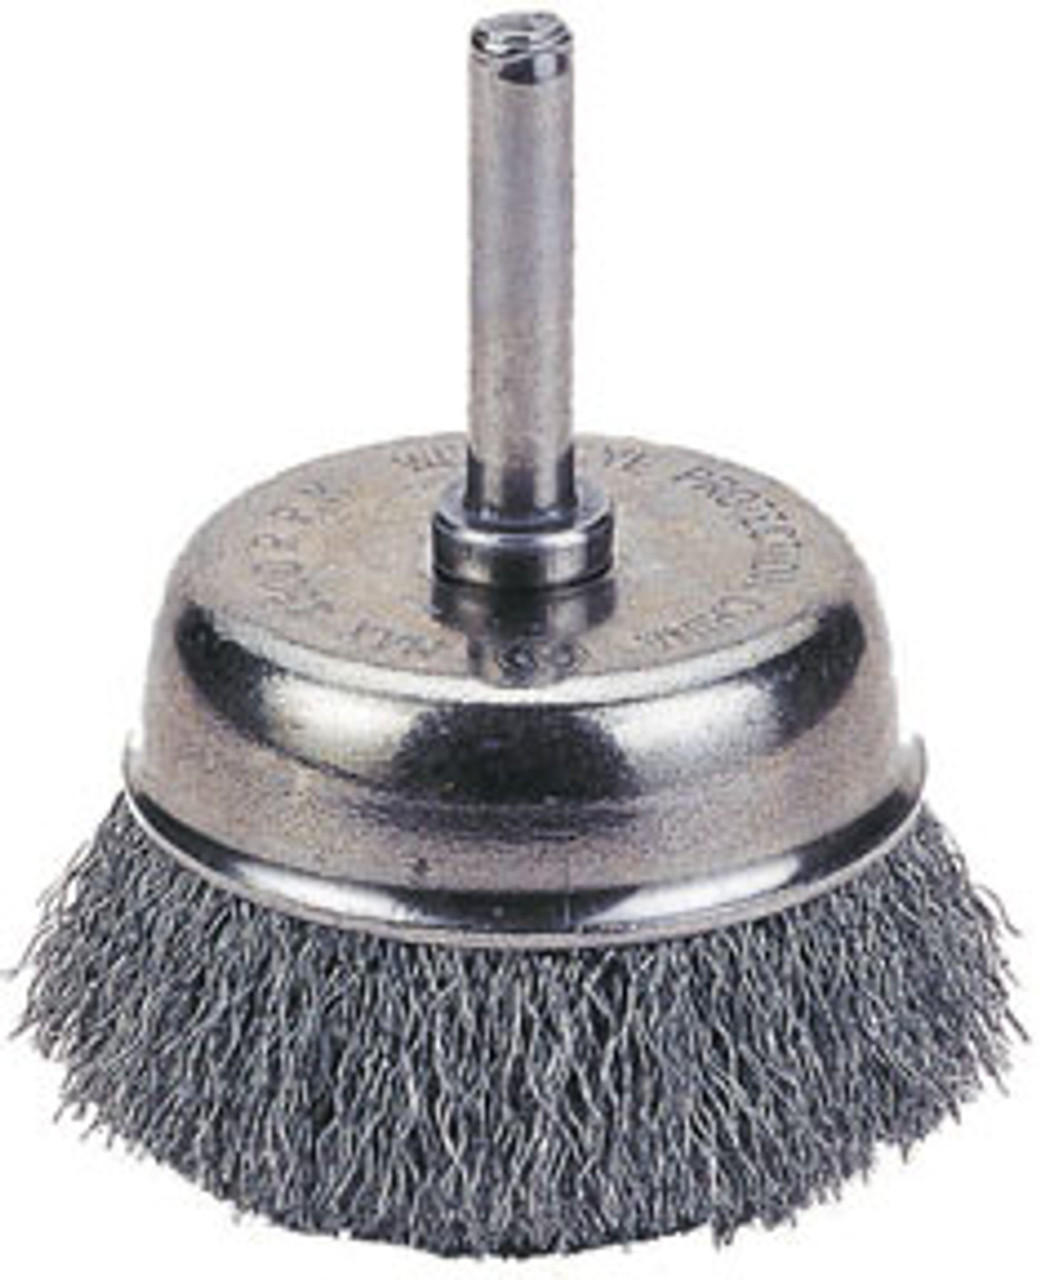 Power Brush: Wire Cup Type, Crimp, 1-1/2" VCT-1423-2106